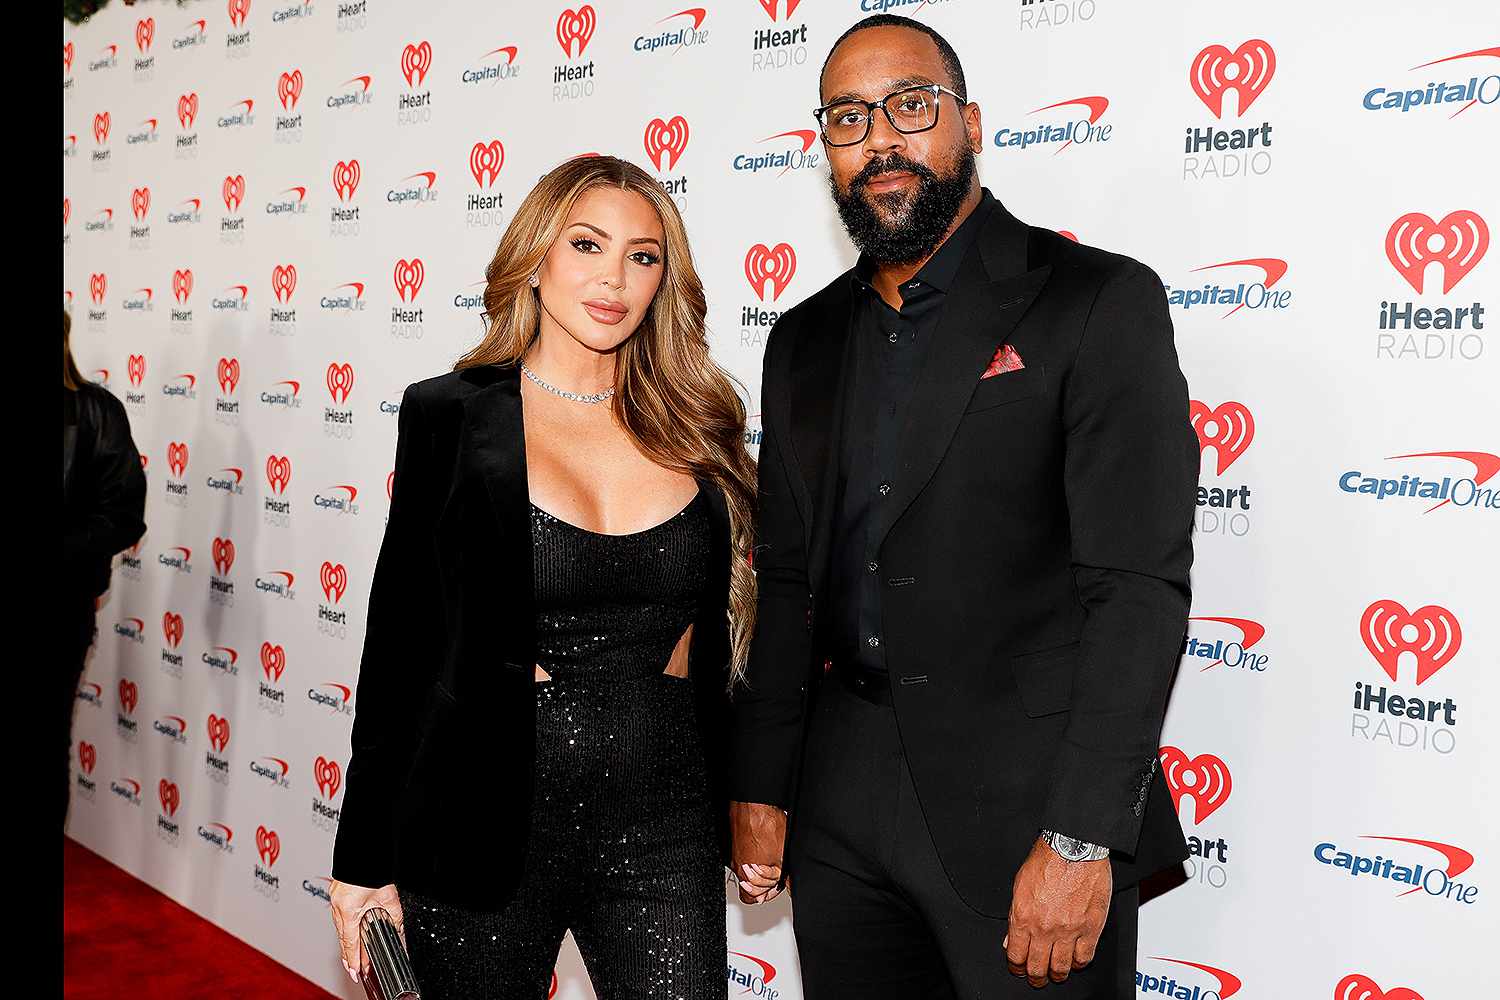 Rekindling Flames: Marcus Jordan and Larsa Pippen's High-Flying Love Story Takes a New Turn